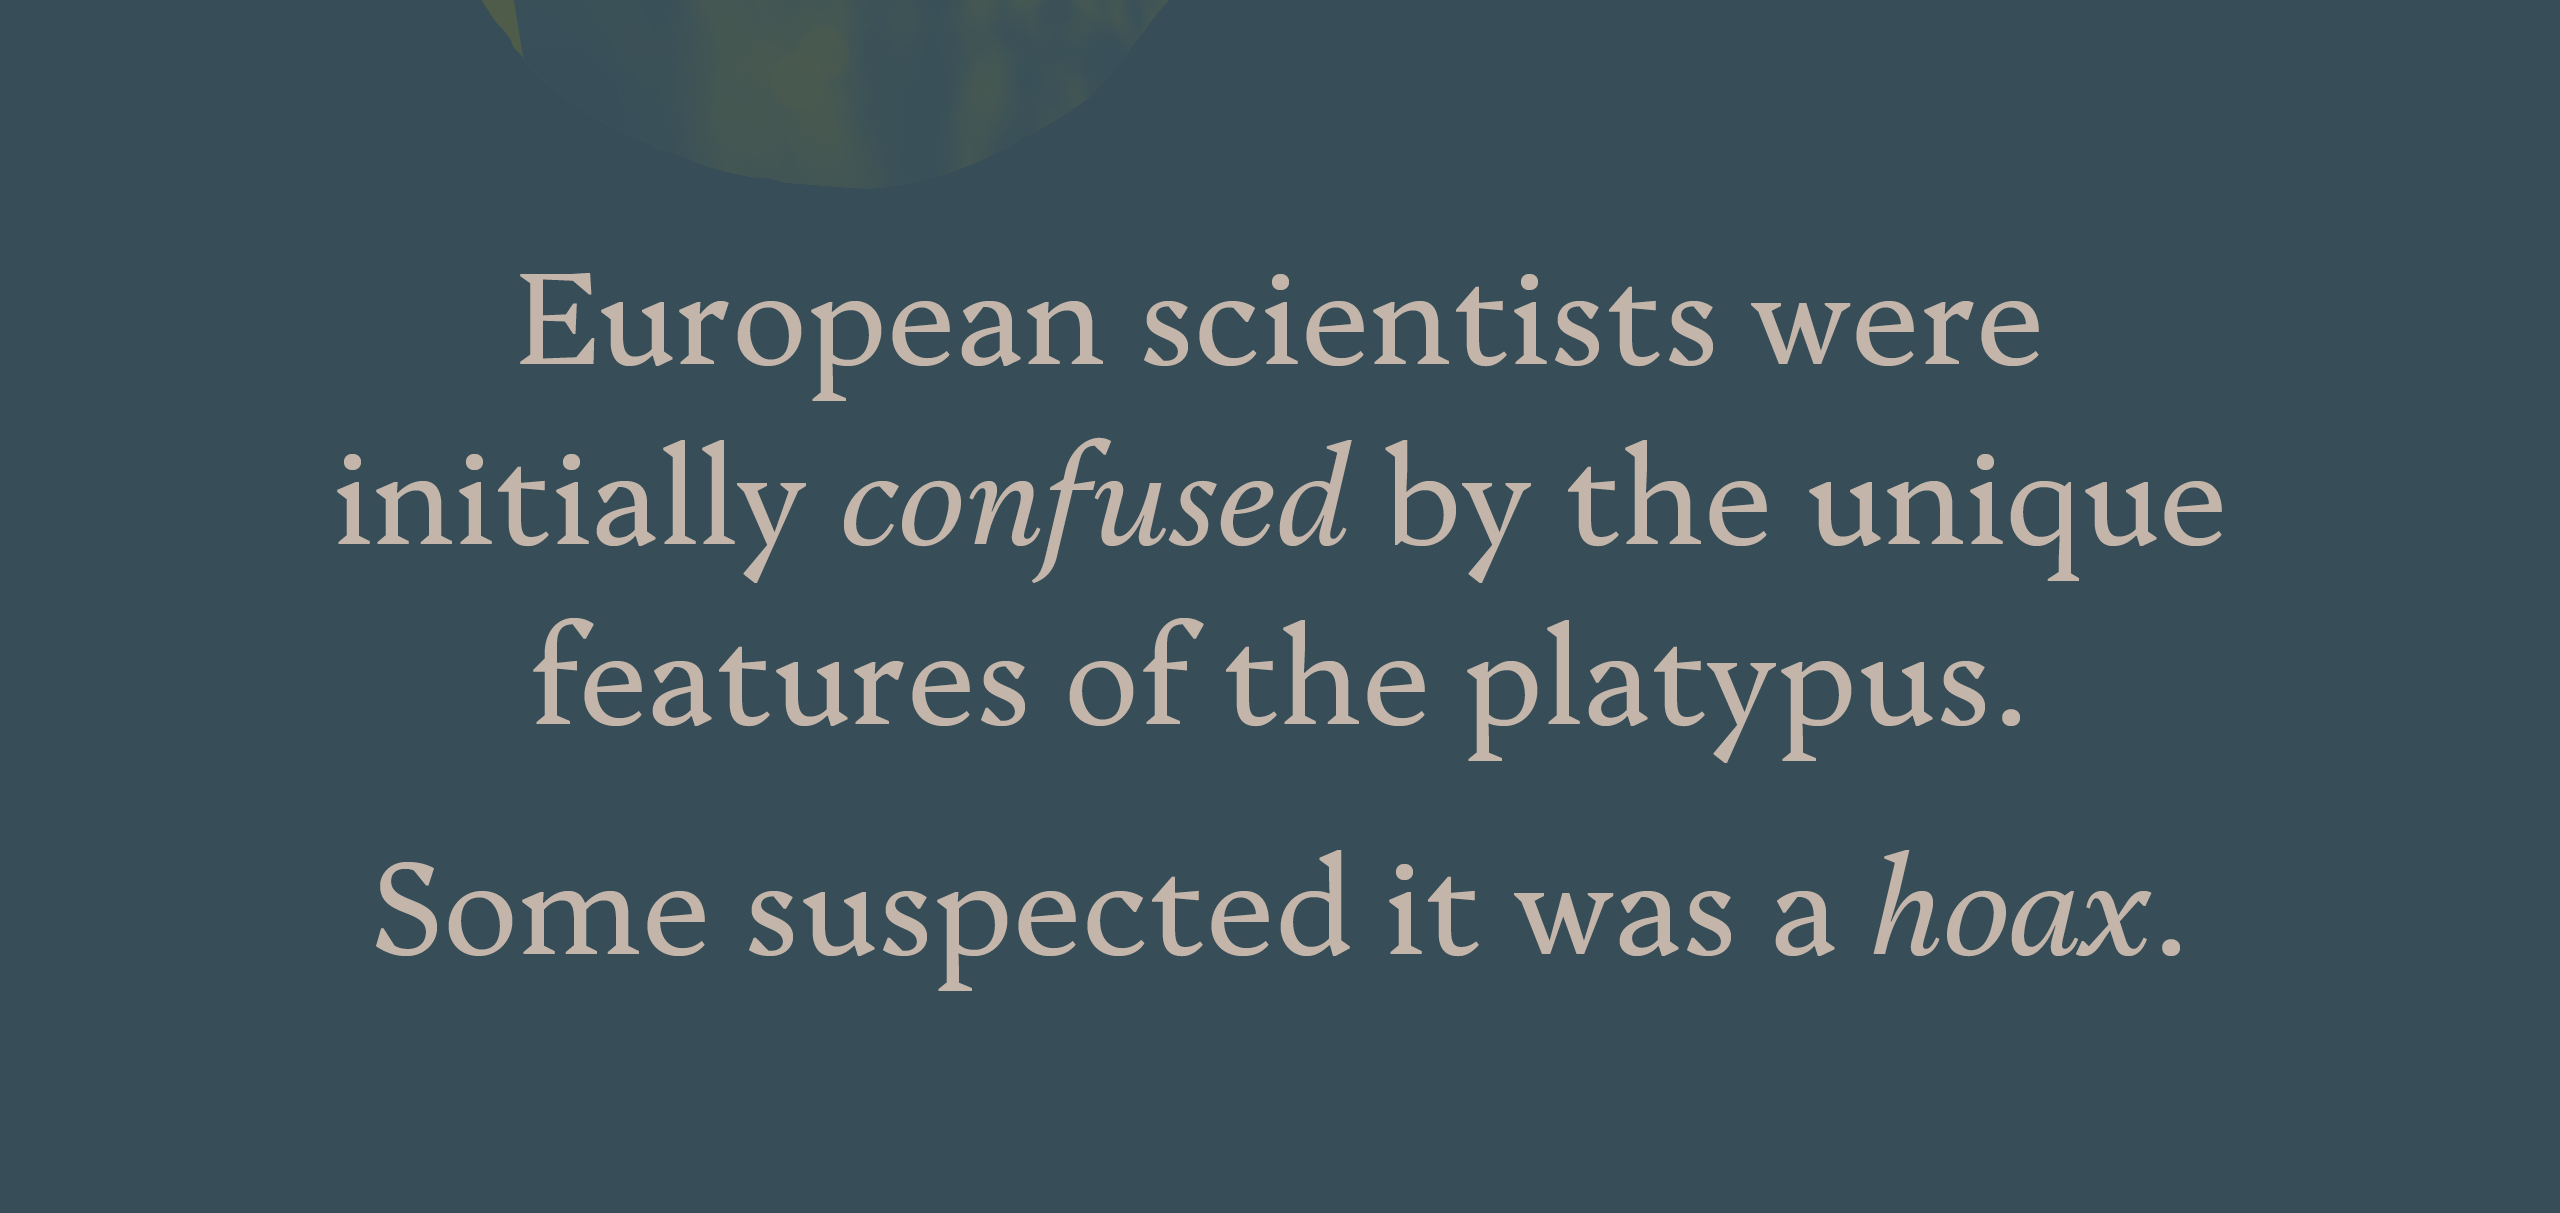 European scientists were initially confused by the unique features of the platypus. Some suspected it was a hoax.